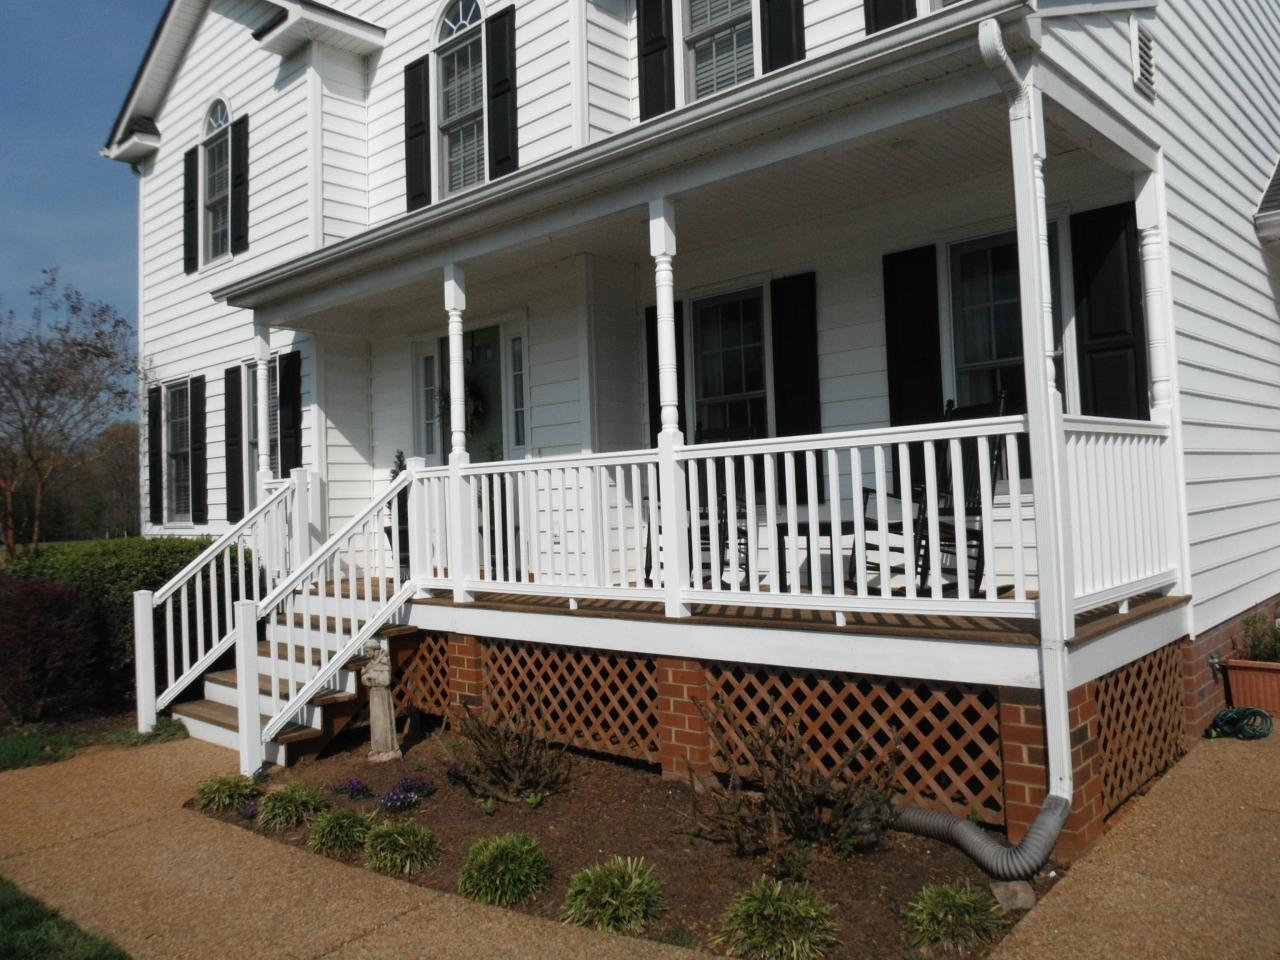 Before and after photos of new composite vinyl front porch railings in